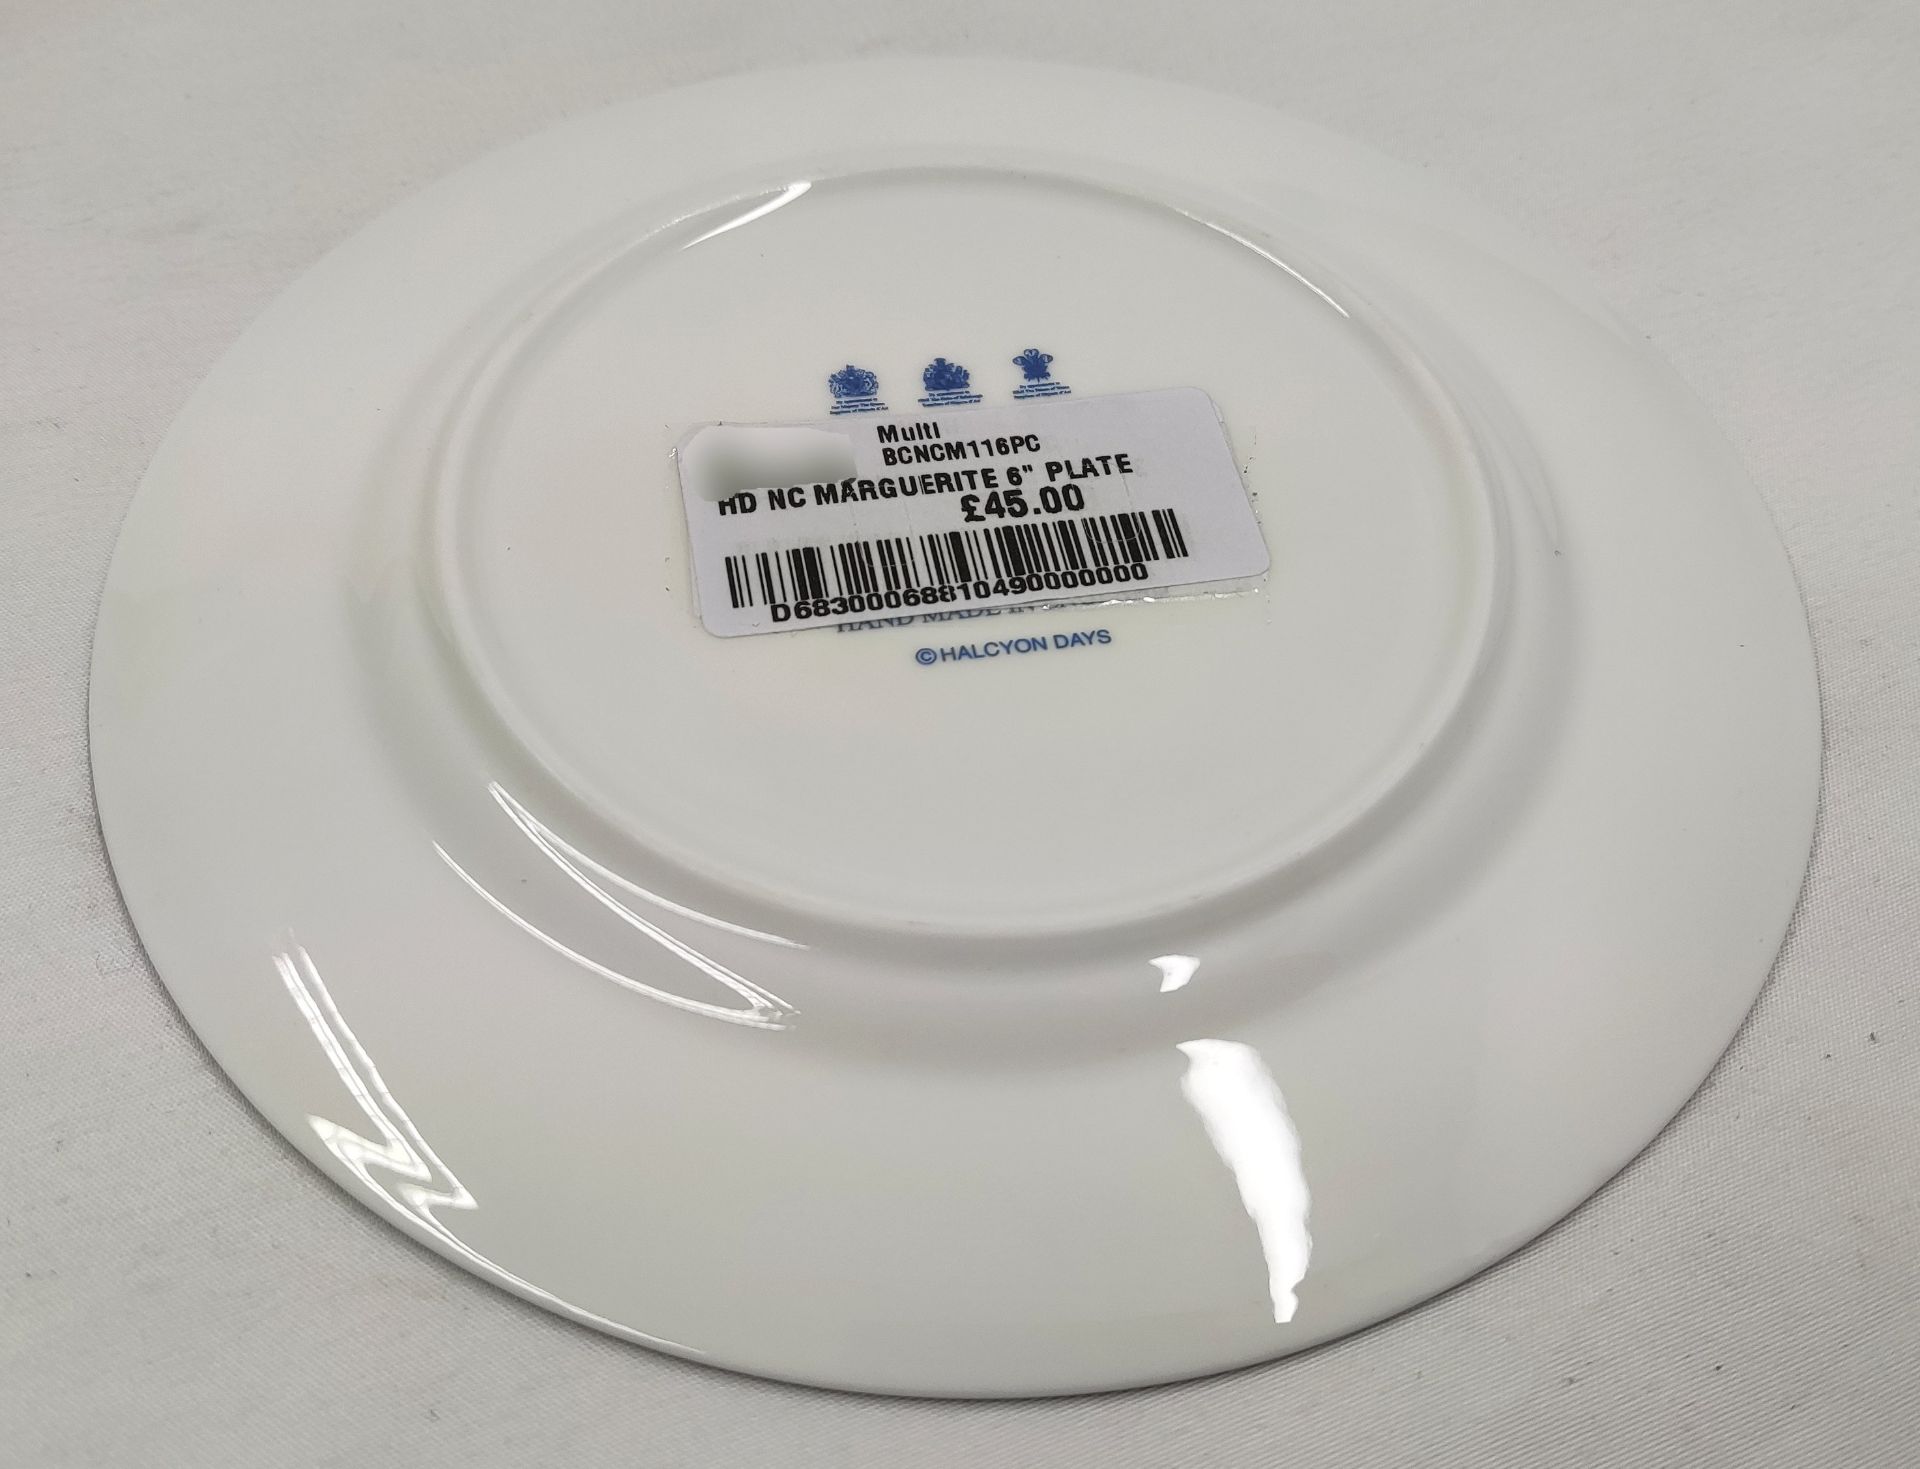 1 x HALCYON DAYS Nina Campbell Marguerite 6" Side Plate - New/Boxed - Original RRP £59.00 - Image 8 of 10